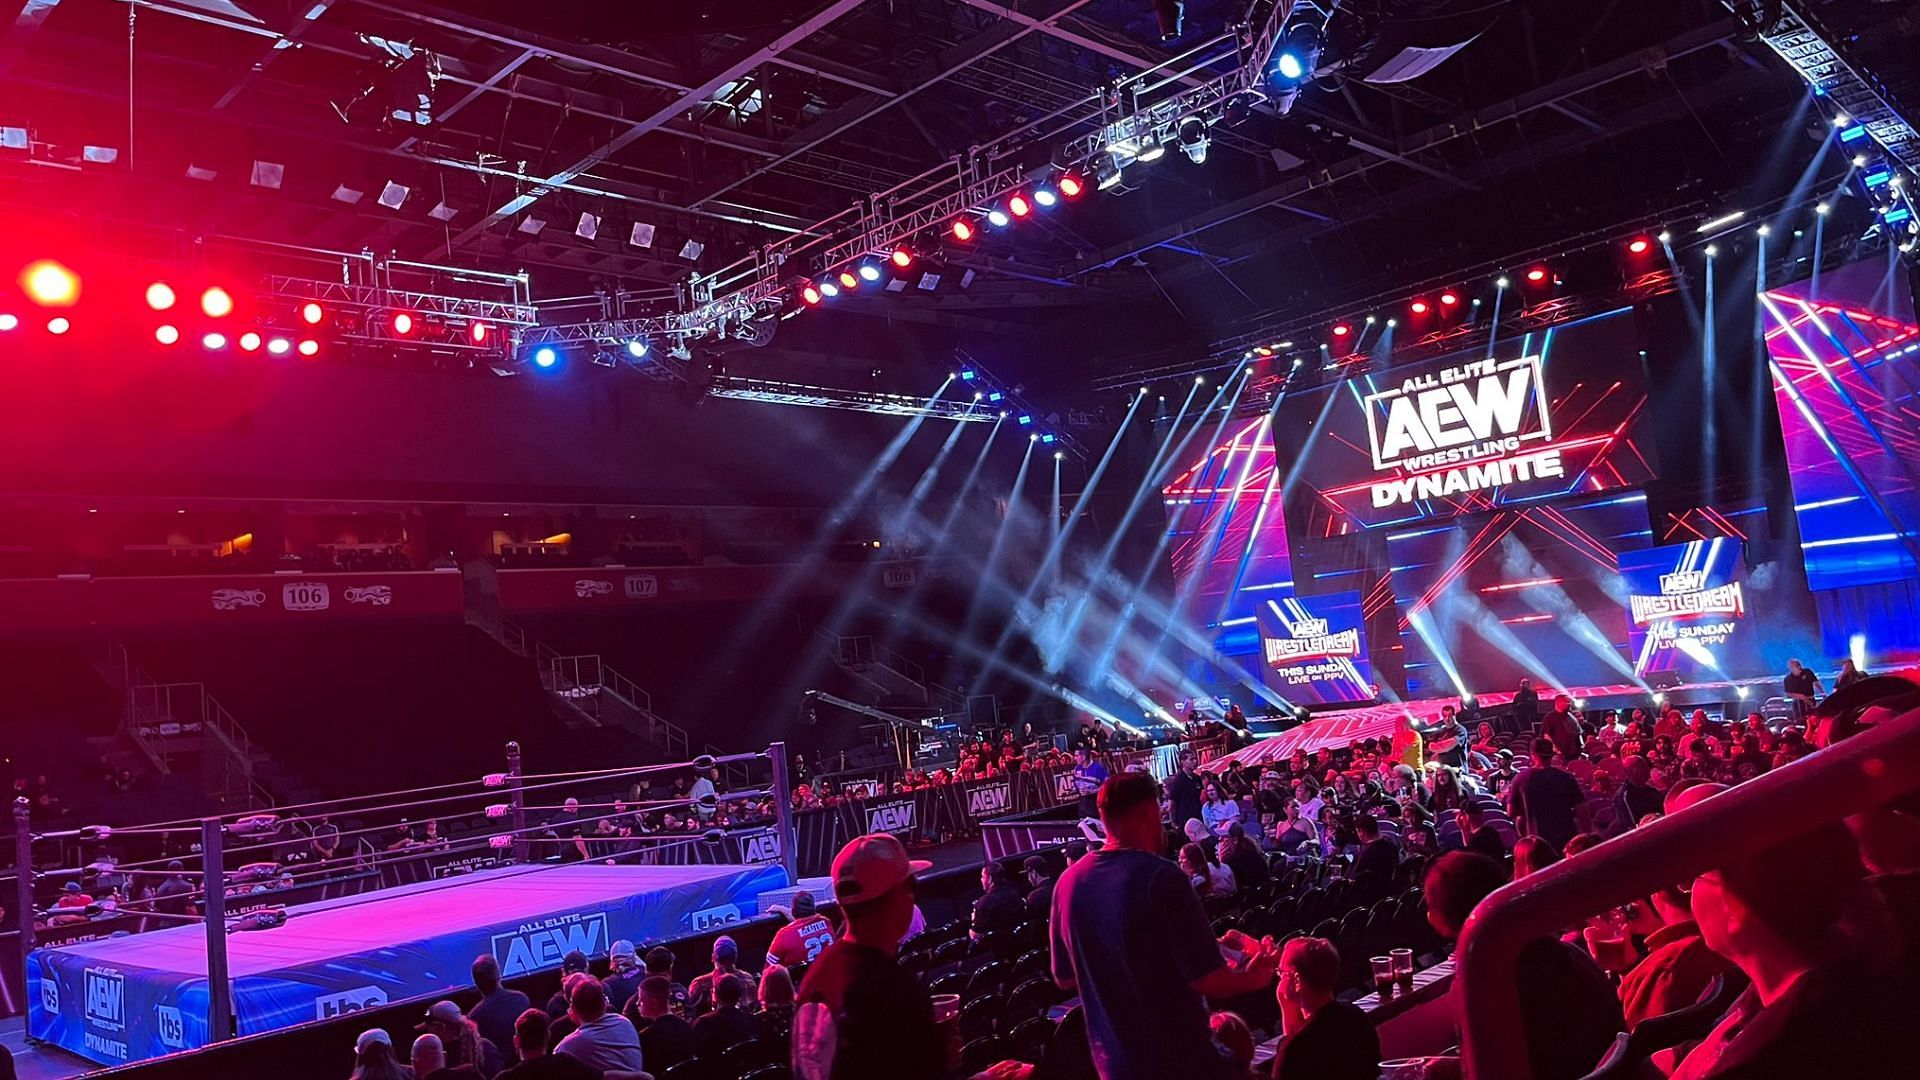 AEW Dynamite arena. Image Credit: Twitter